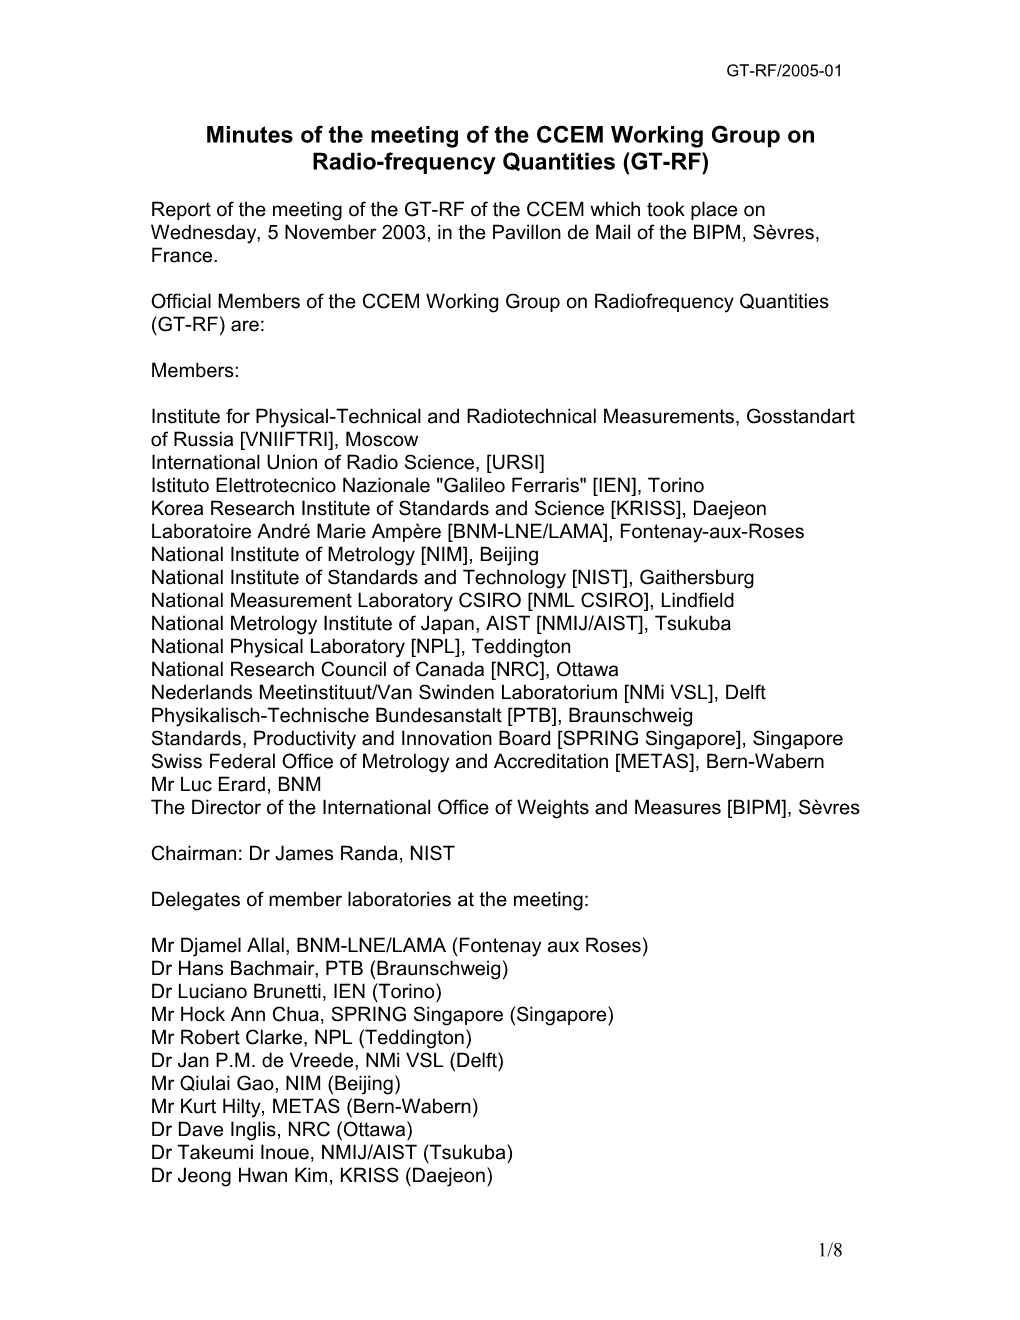 Draft Agenda for the Meeting of the CCEM Working Group on Rado-Frequency Quantities (GT-RF)